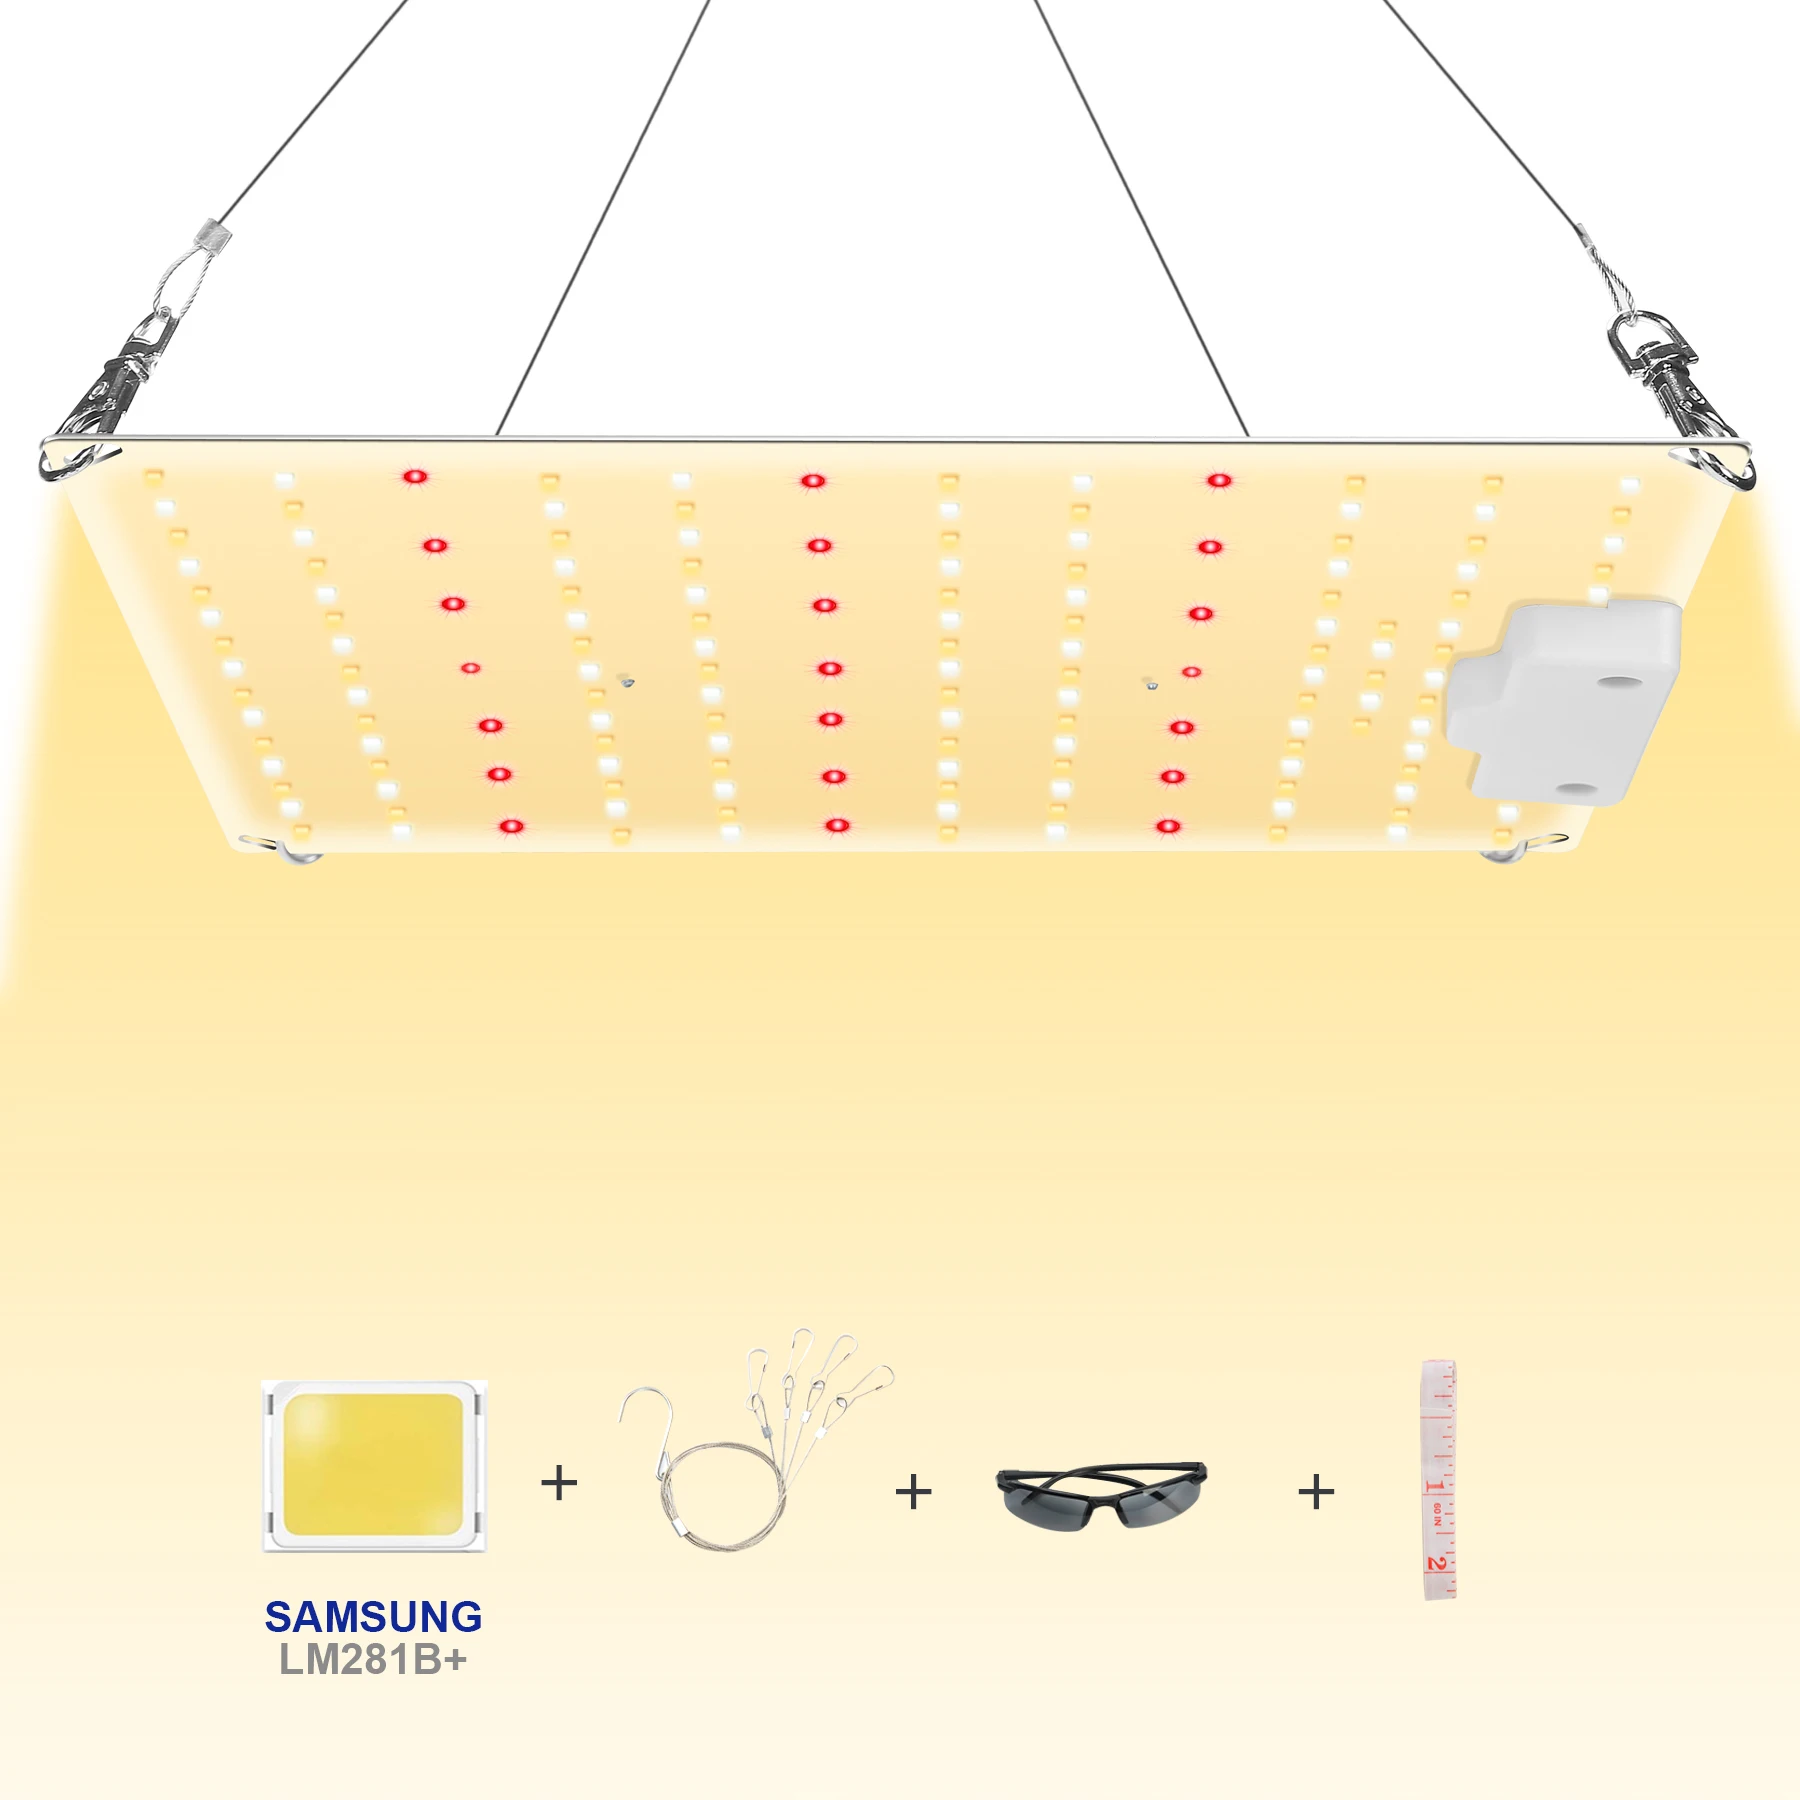 Samsung LM281B Quantum Board LED Grow Light 600W Full Spectrum Phyto Lamp for Plant Hydroponic Greenhouse